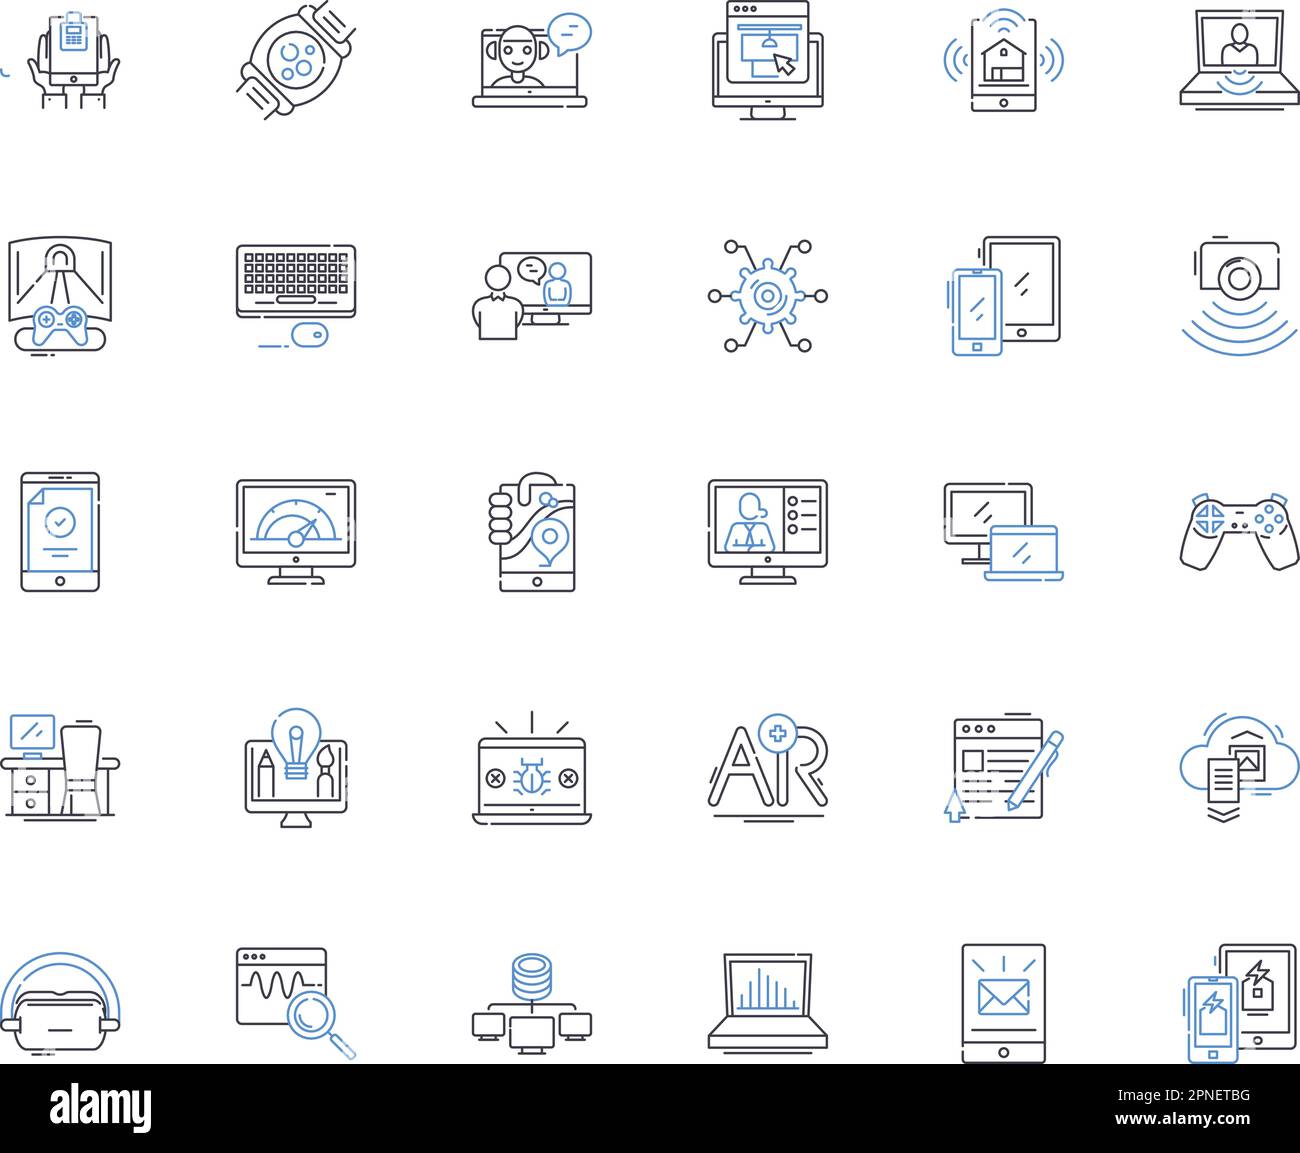 Data analysis line icons collection. Analytics, Statistics, Metrics, Visualization, Insights, Trends, Forecasting vector and linear illustration Stock Vector